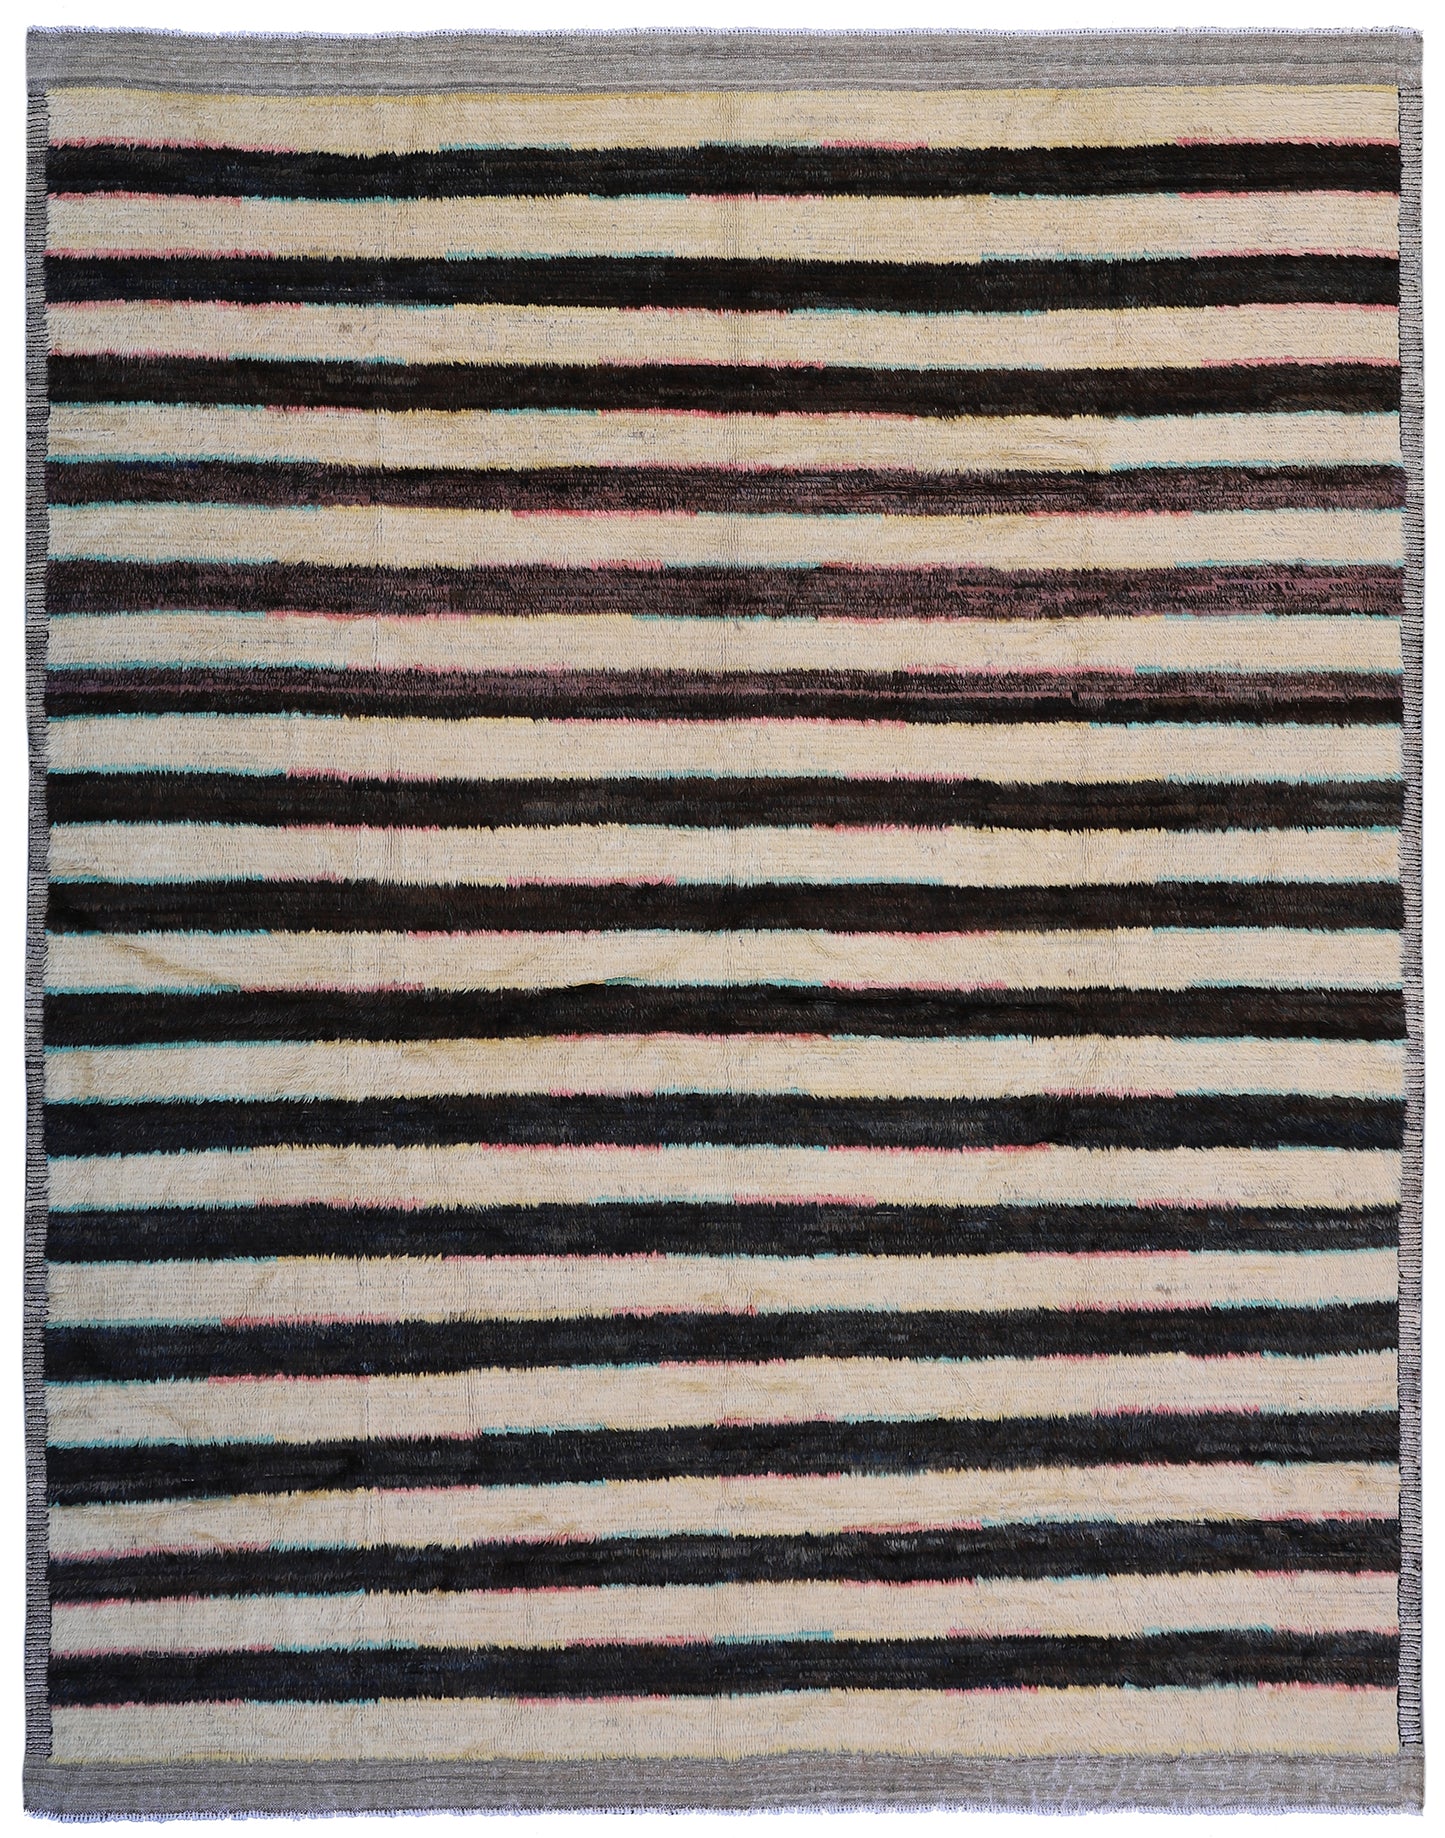 11'x9' Ariana Moroccan Style Striped Barchi Rug